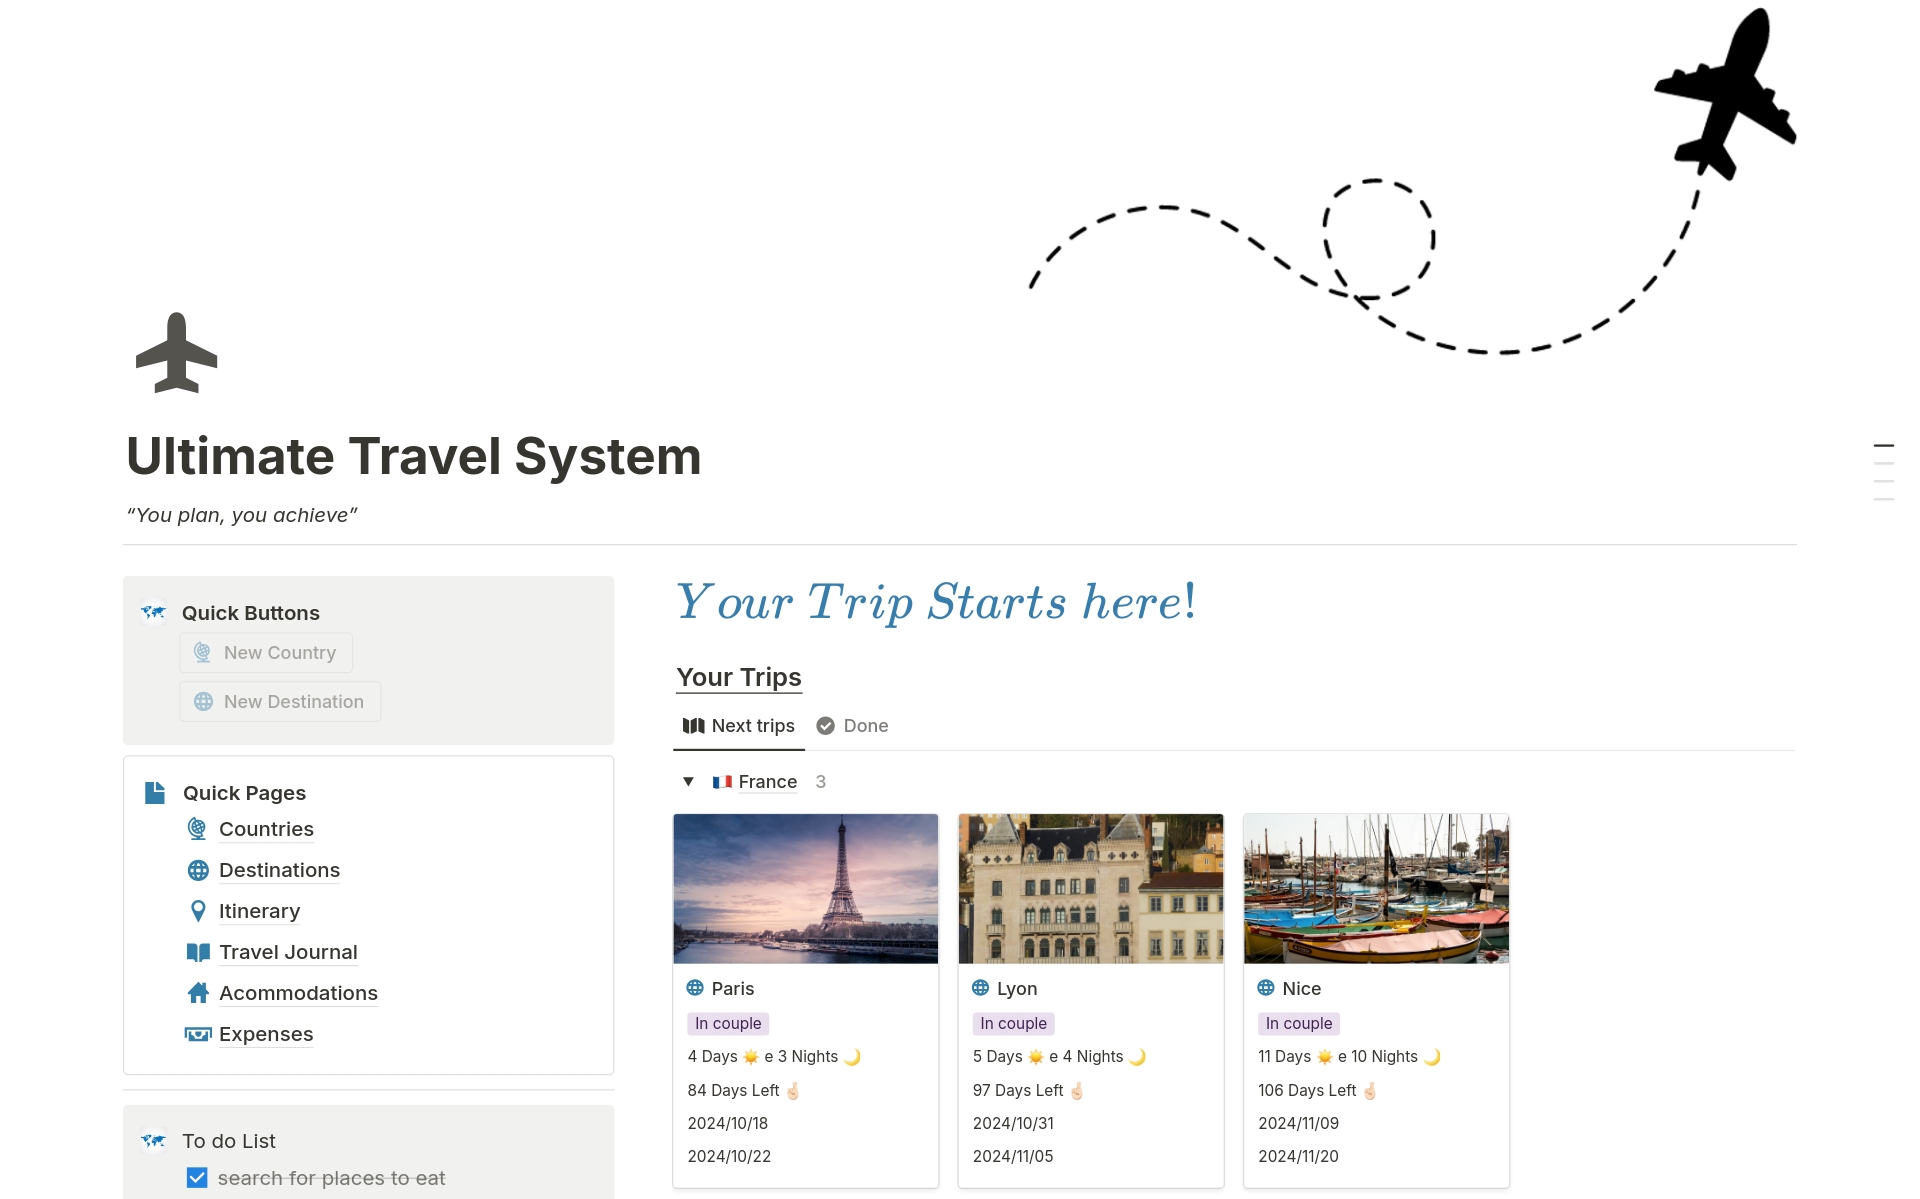 The ultimate travel system is your passport to start planning your trips like never before! With a clean and intuitive design, you can now plan everything! From choosing the destination, itinerary, accommodations, to expenses, EVERYTHING in one place!